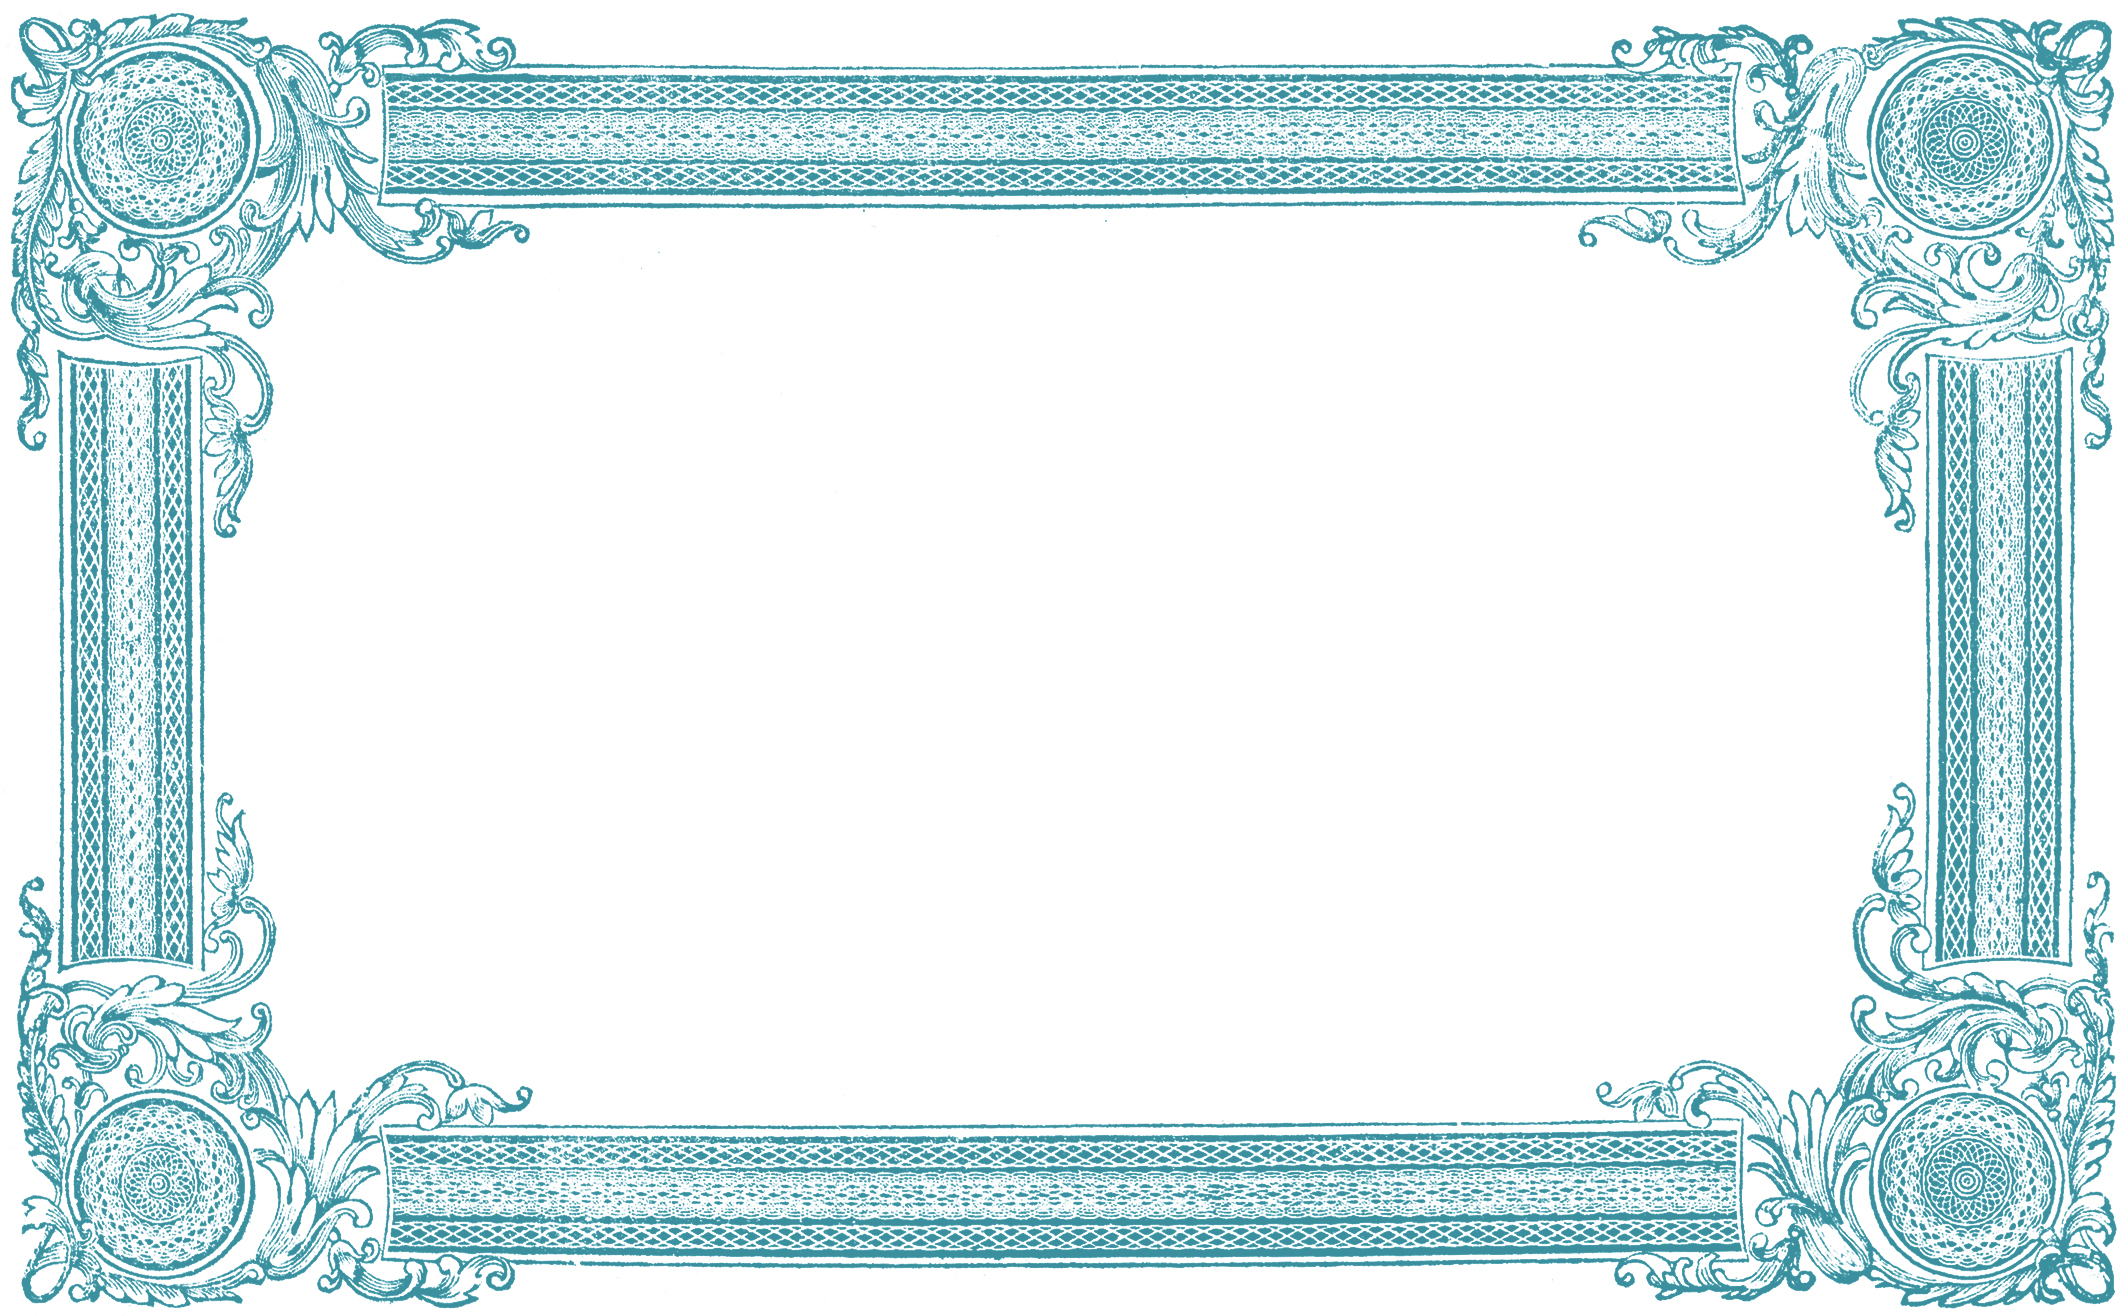 clip art and frames download - photo #36